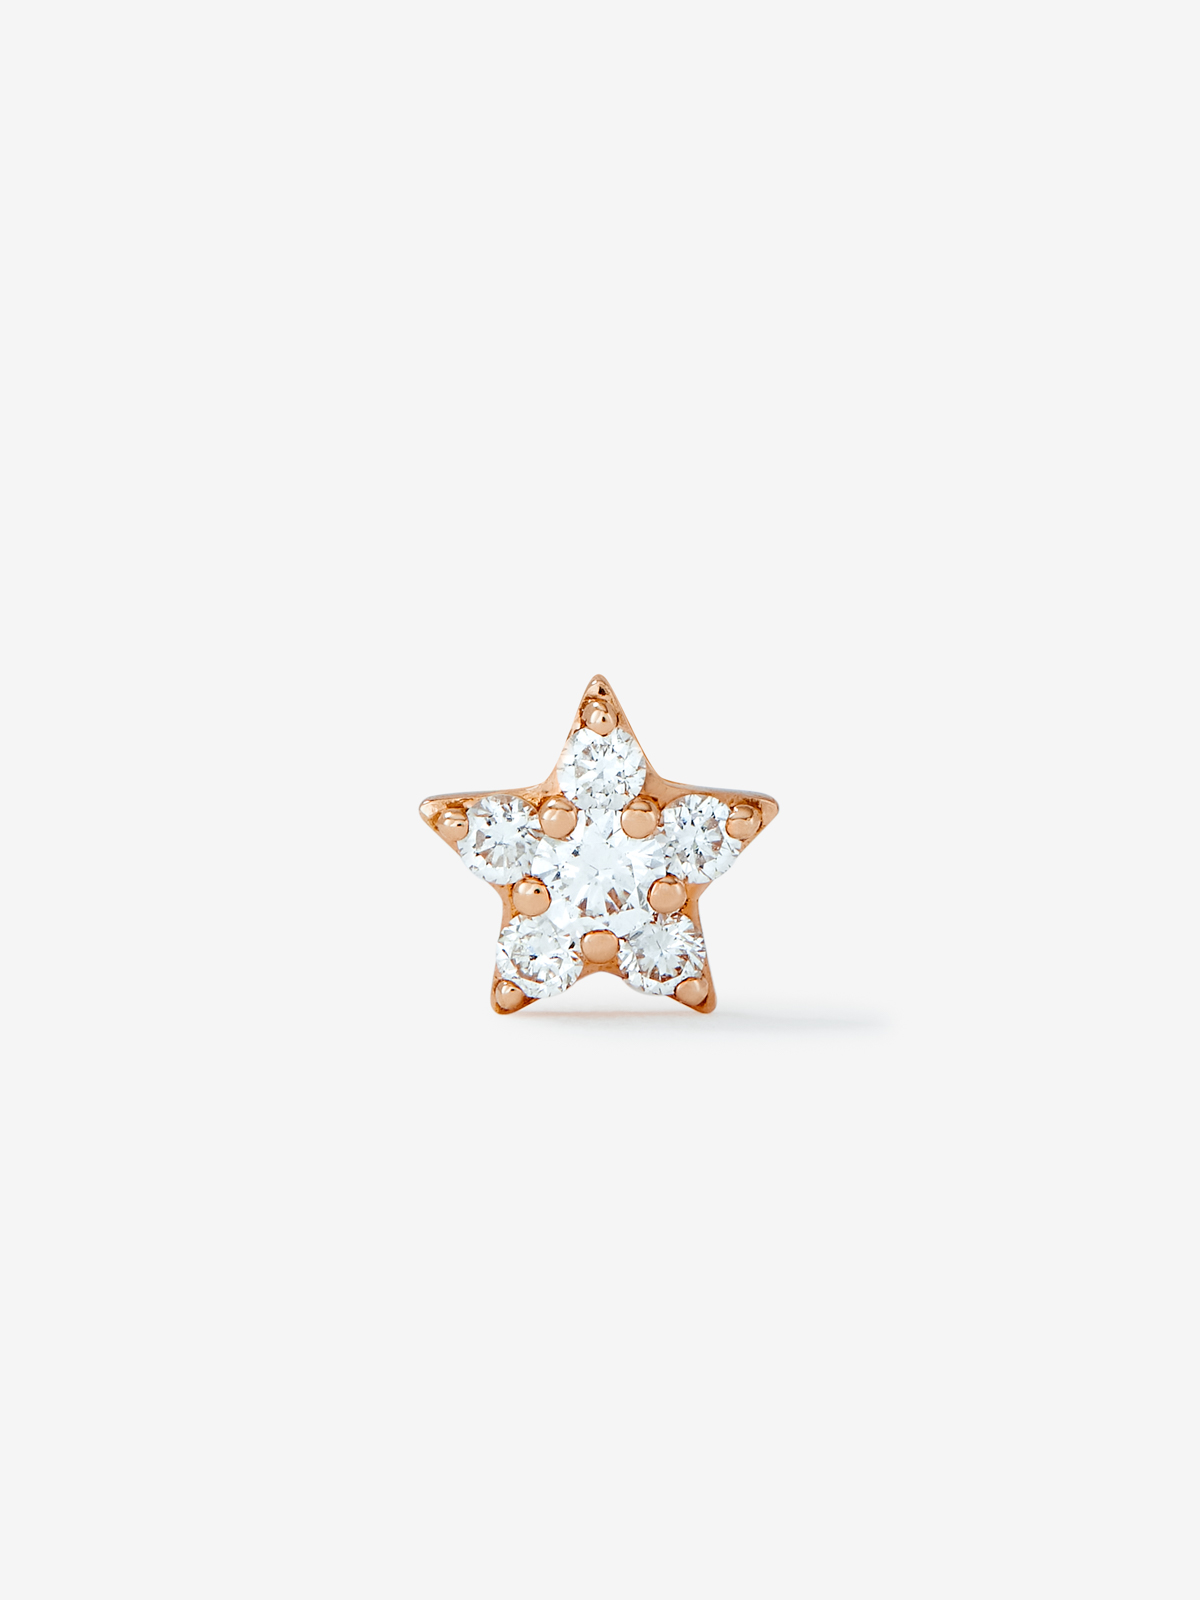 Individual 18K rose gold star earring with diamonds